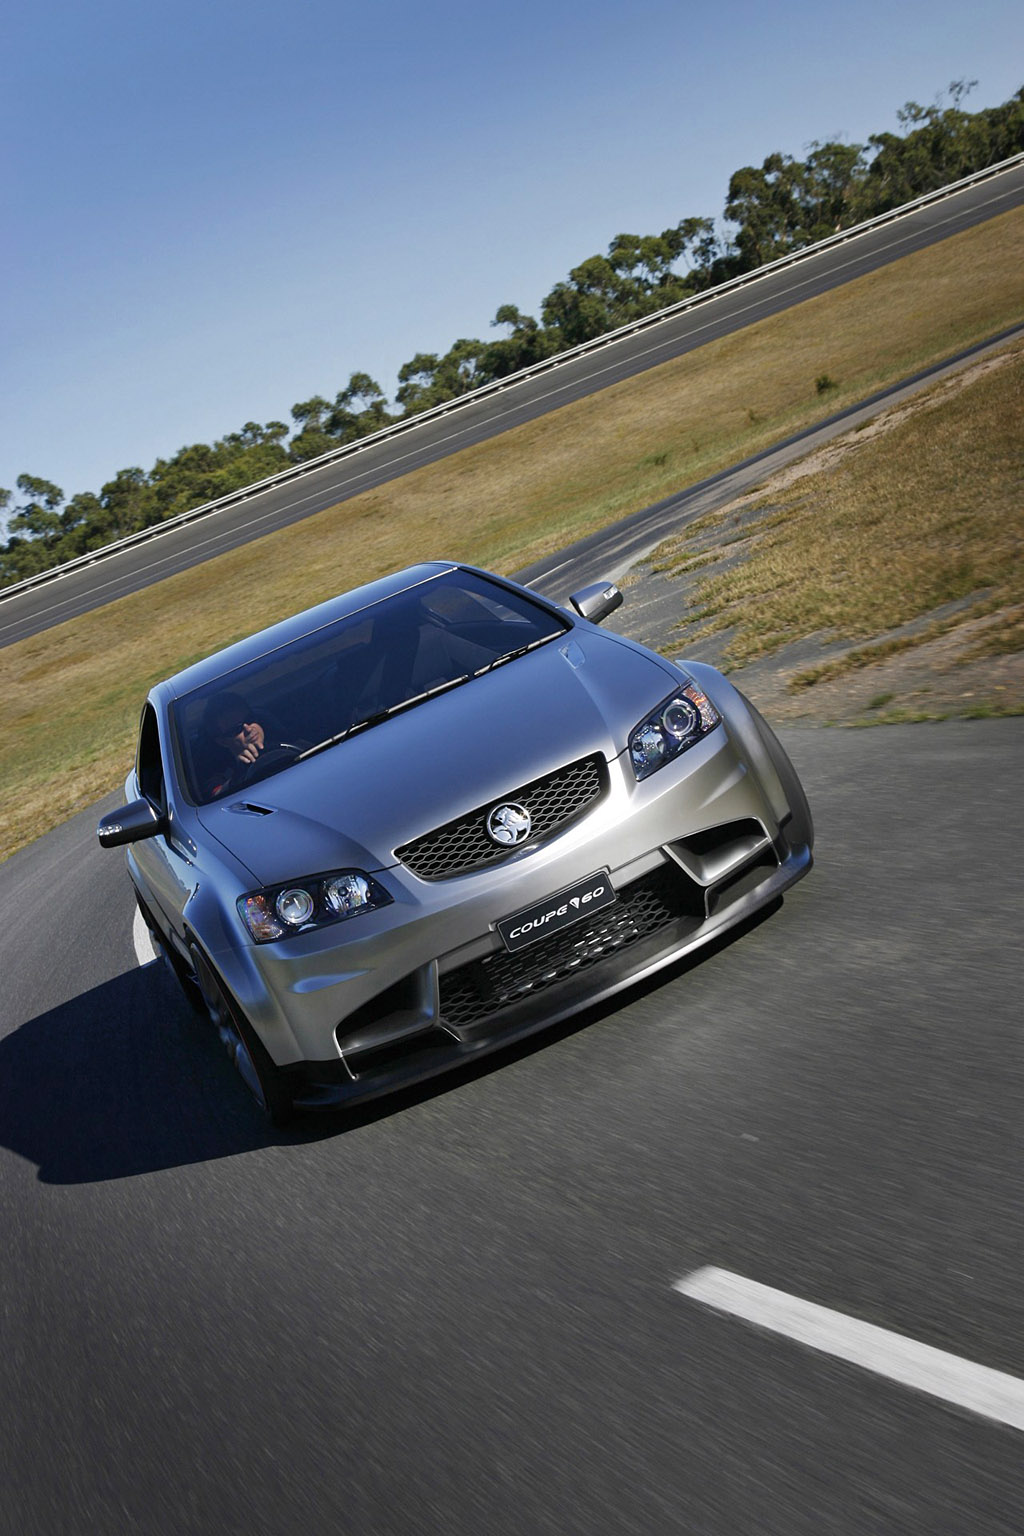 Holden Coupe 60 Wallpapers